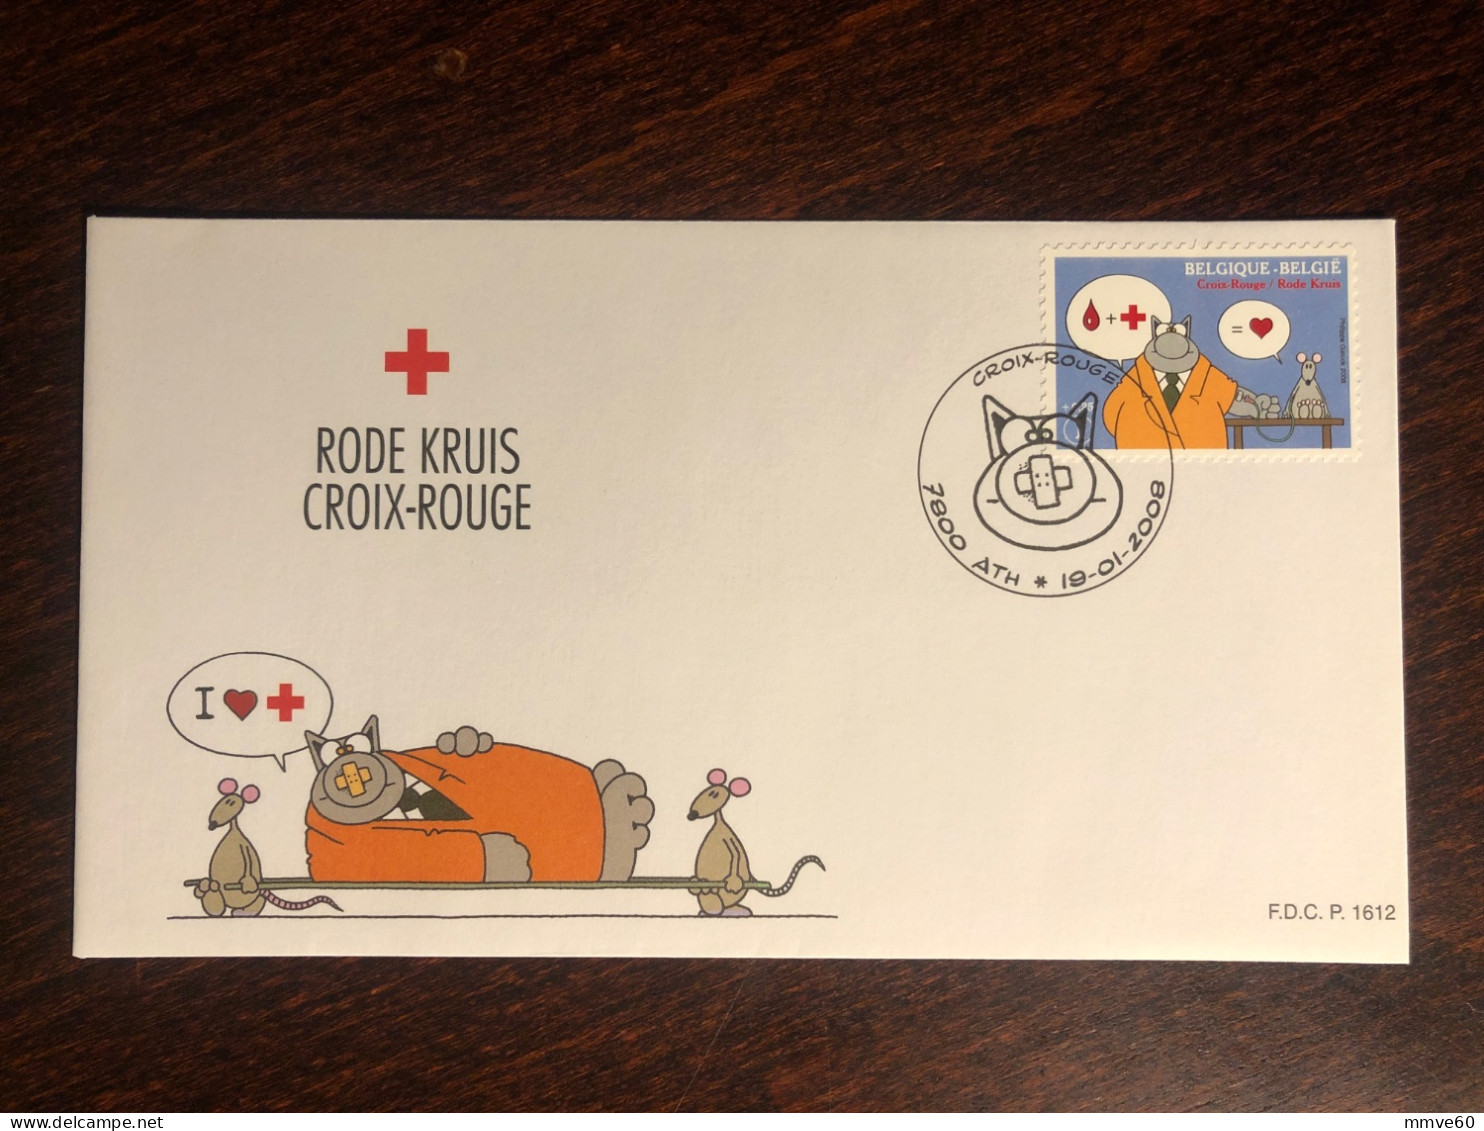 BELGIUM FDC COVER 2008 YEAR RED CROSS HEALTH MEDICINE STAMPS - Covers & Documents